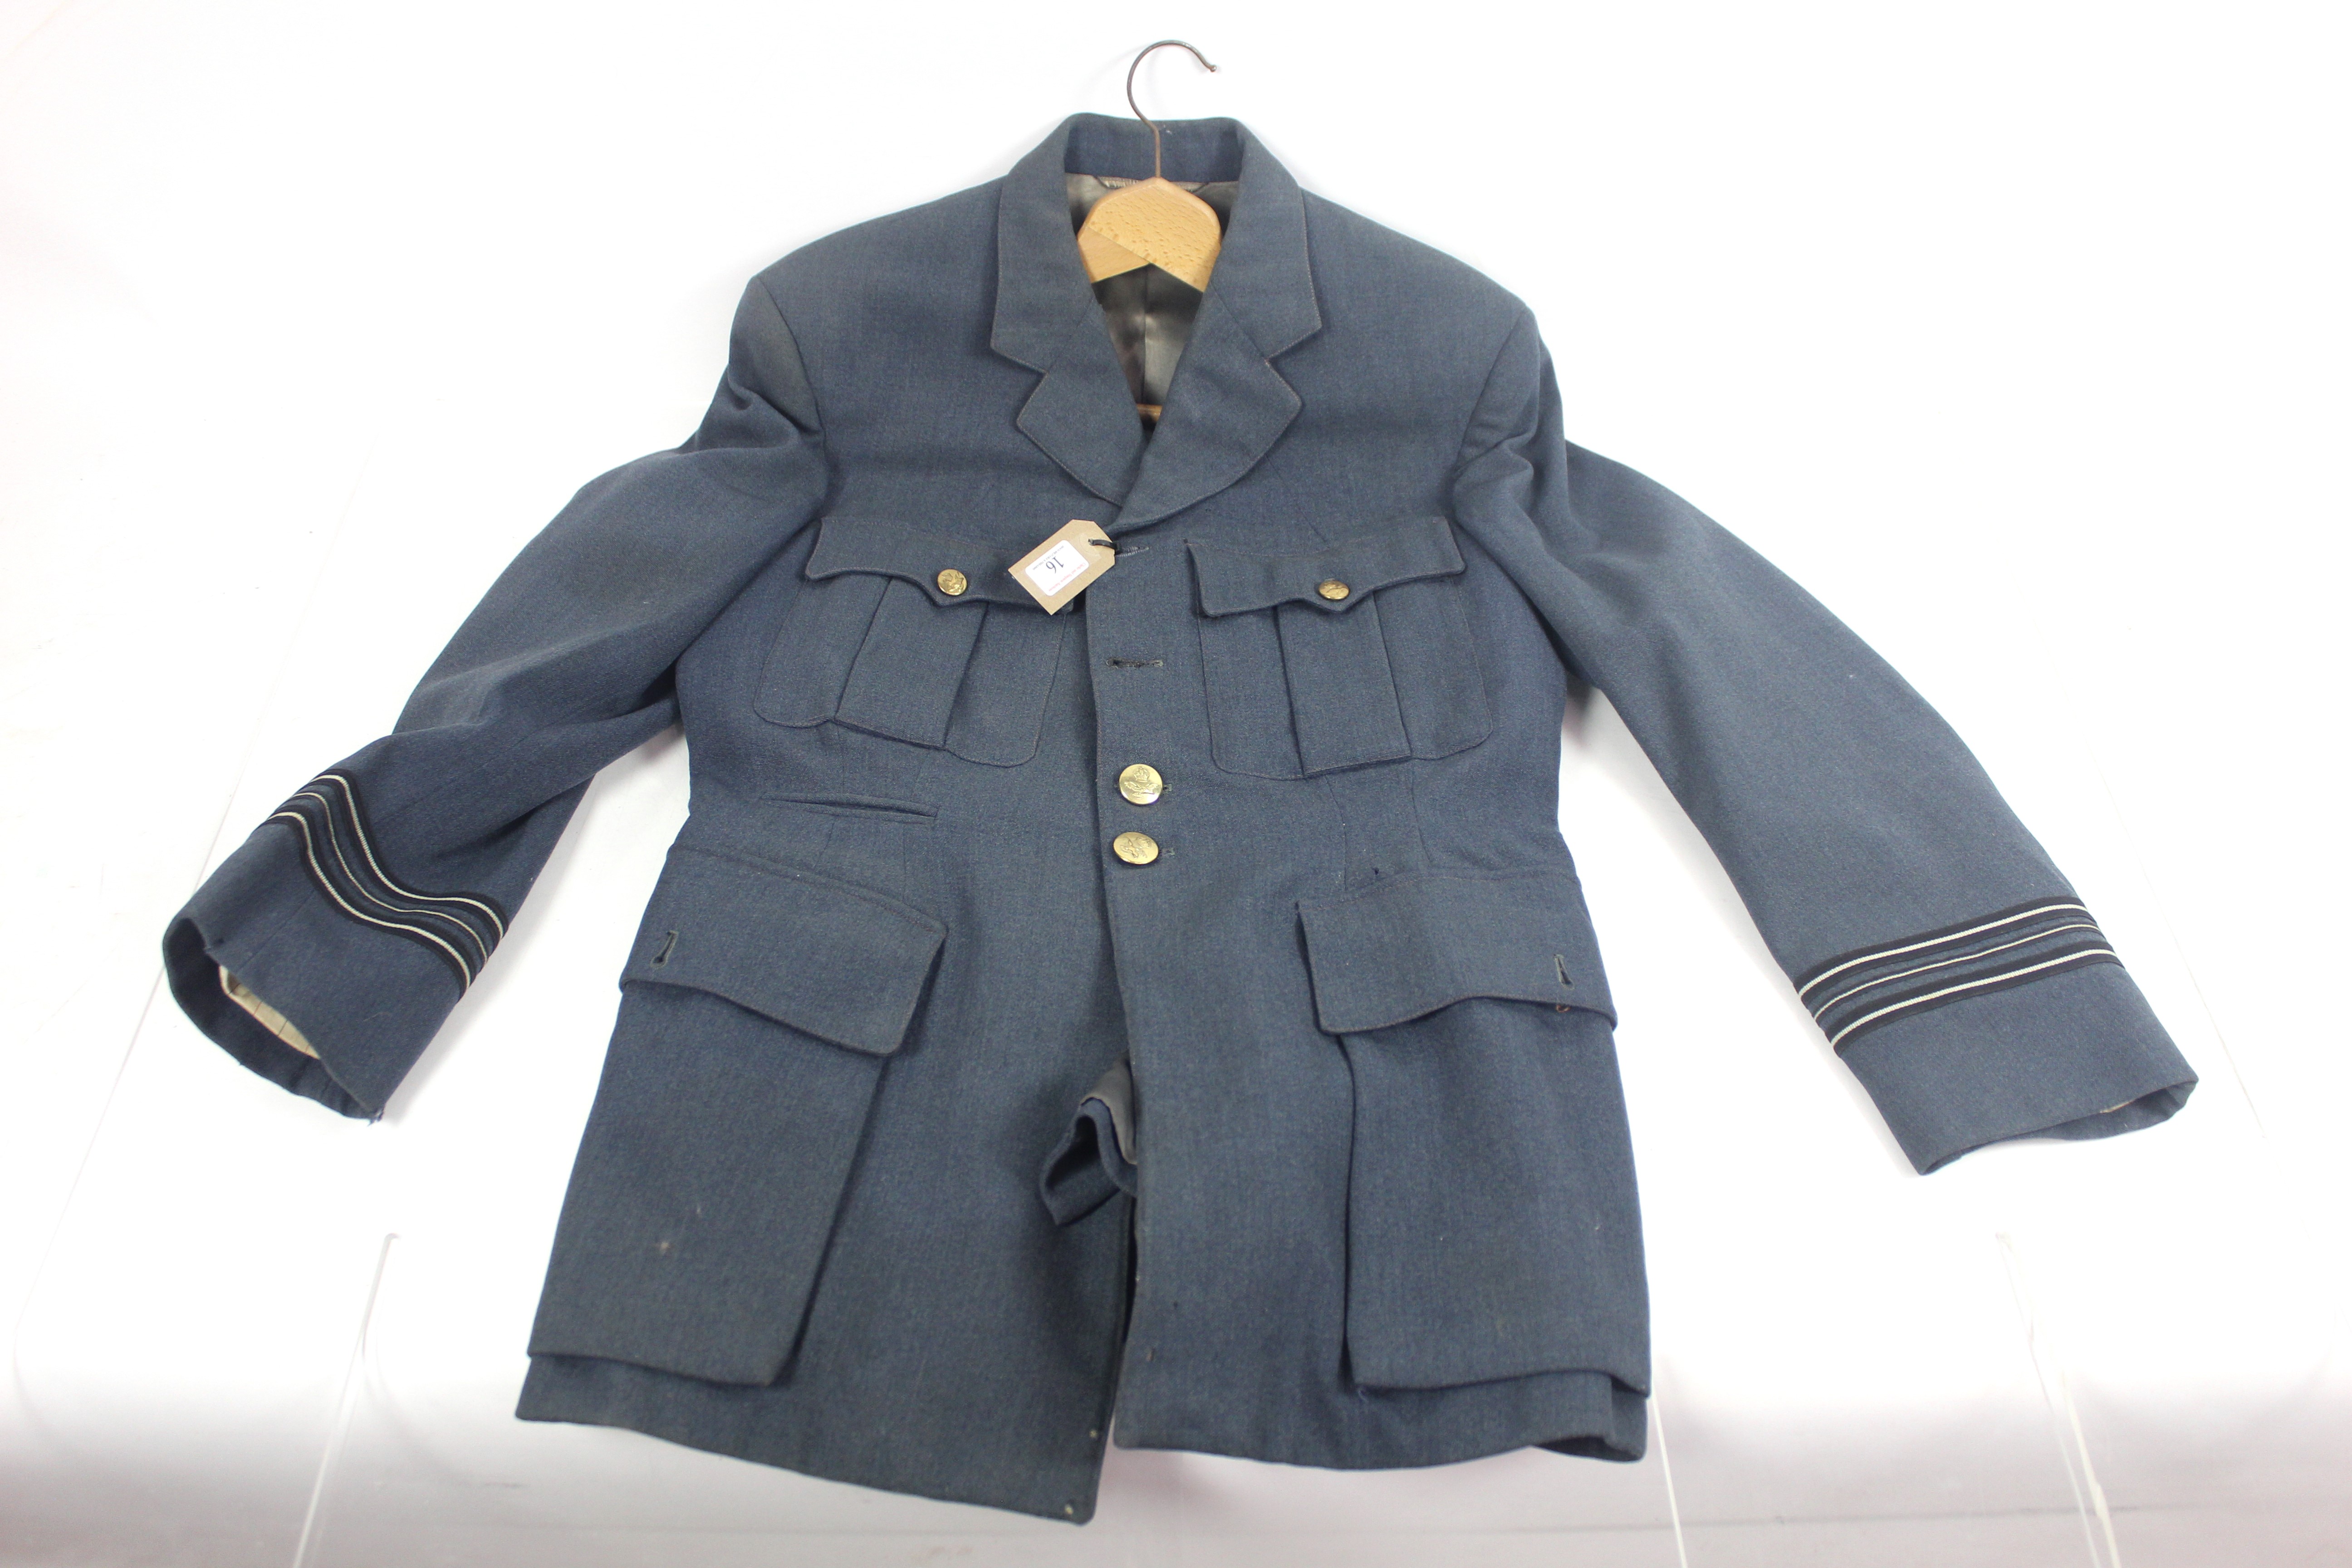 An R.A.F. Officers service jacket with Kings Crown